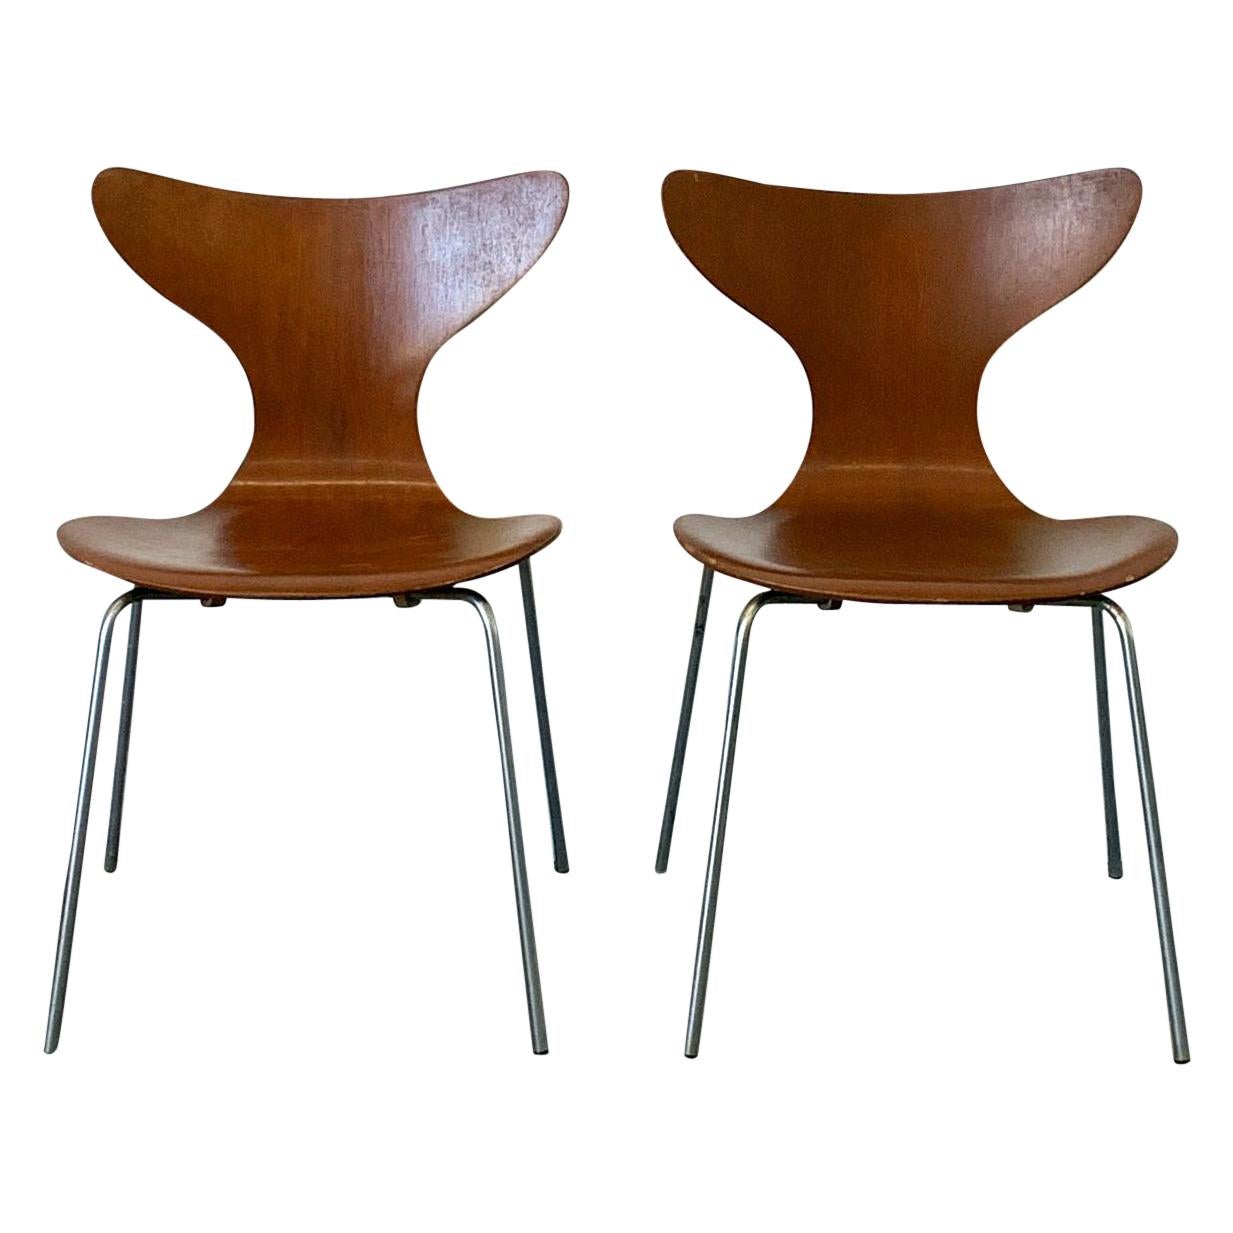 Rare Early Arne Jacobsen Lily Chairs, Fritz Hansen, 1969, a Pair